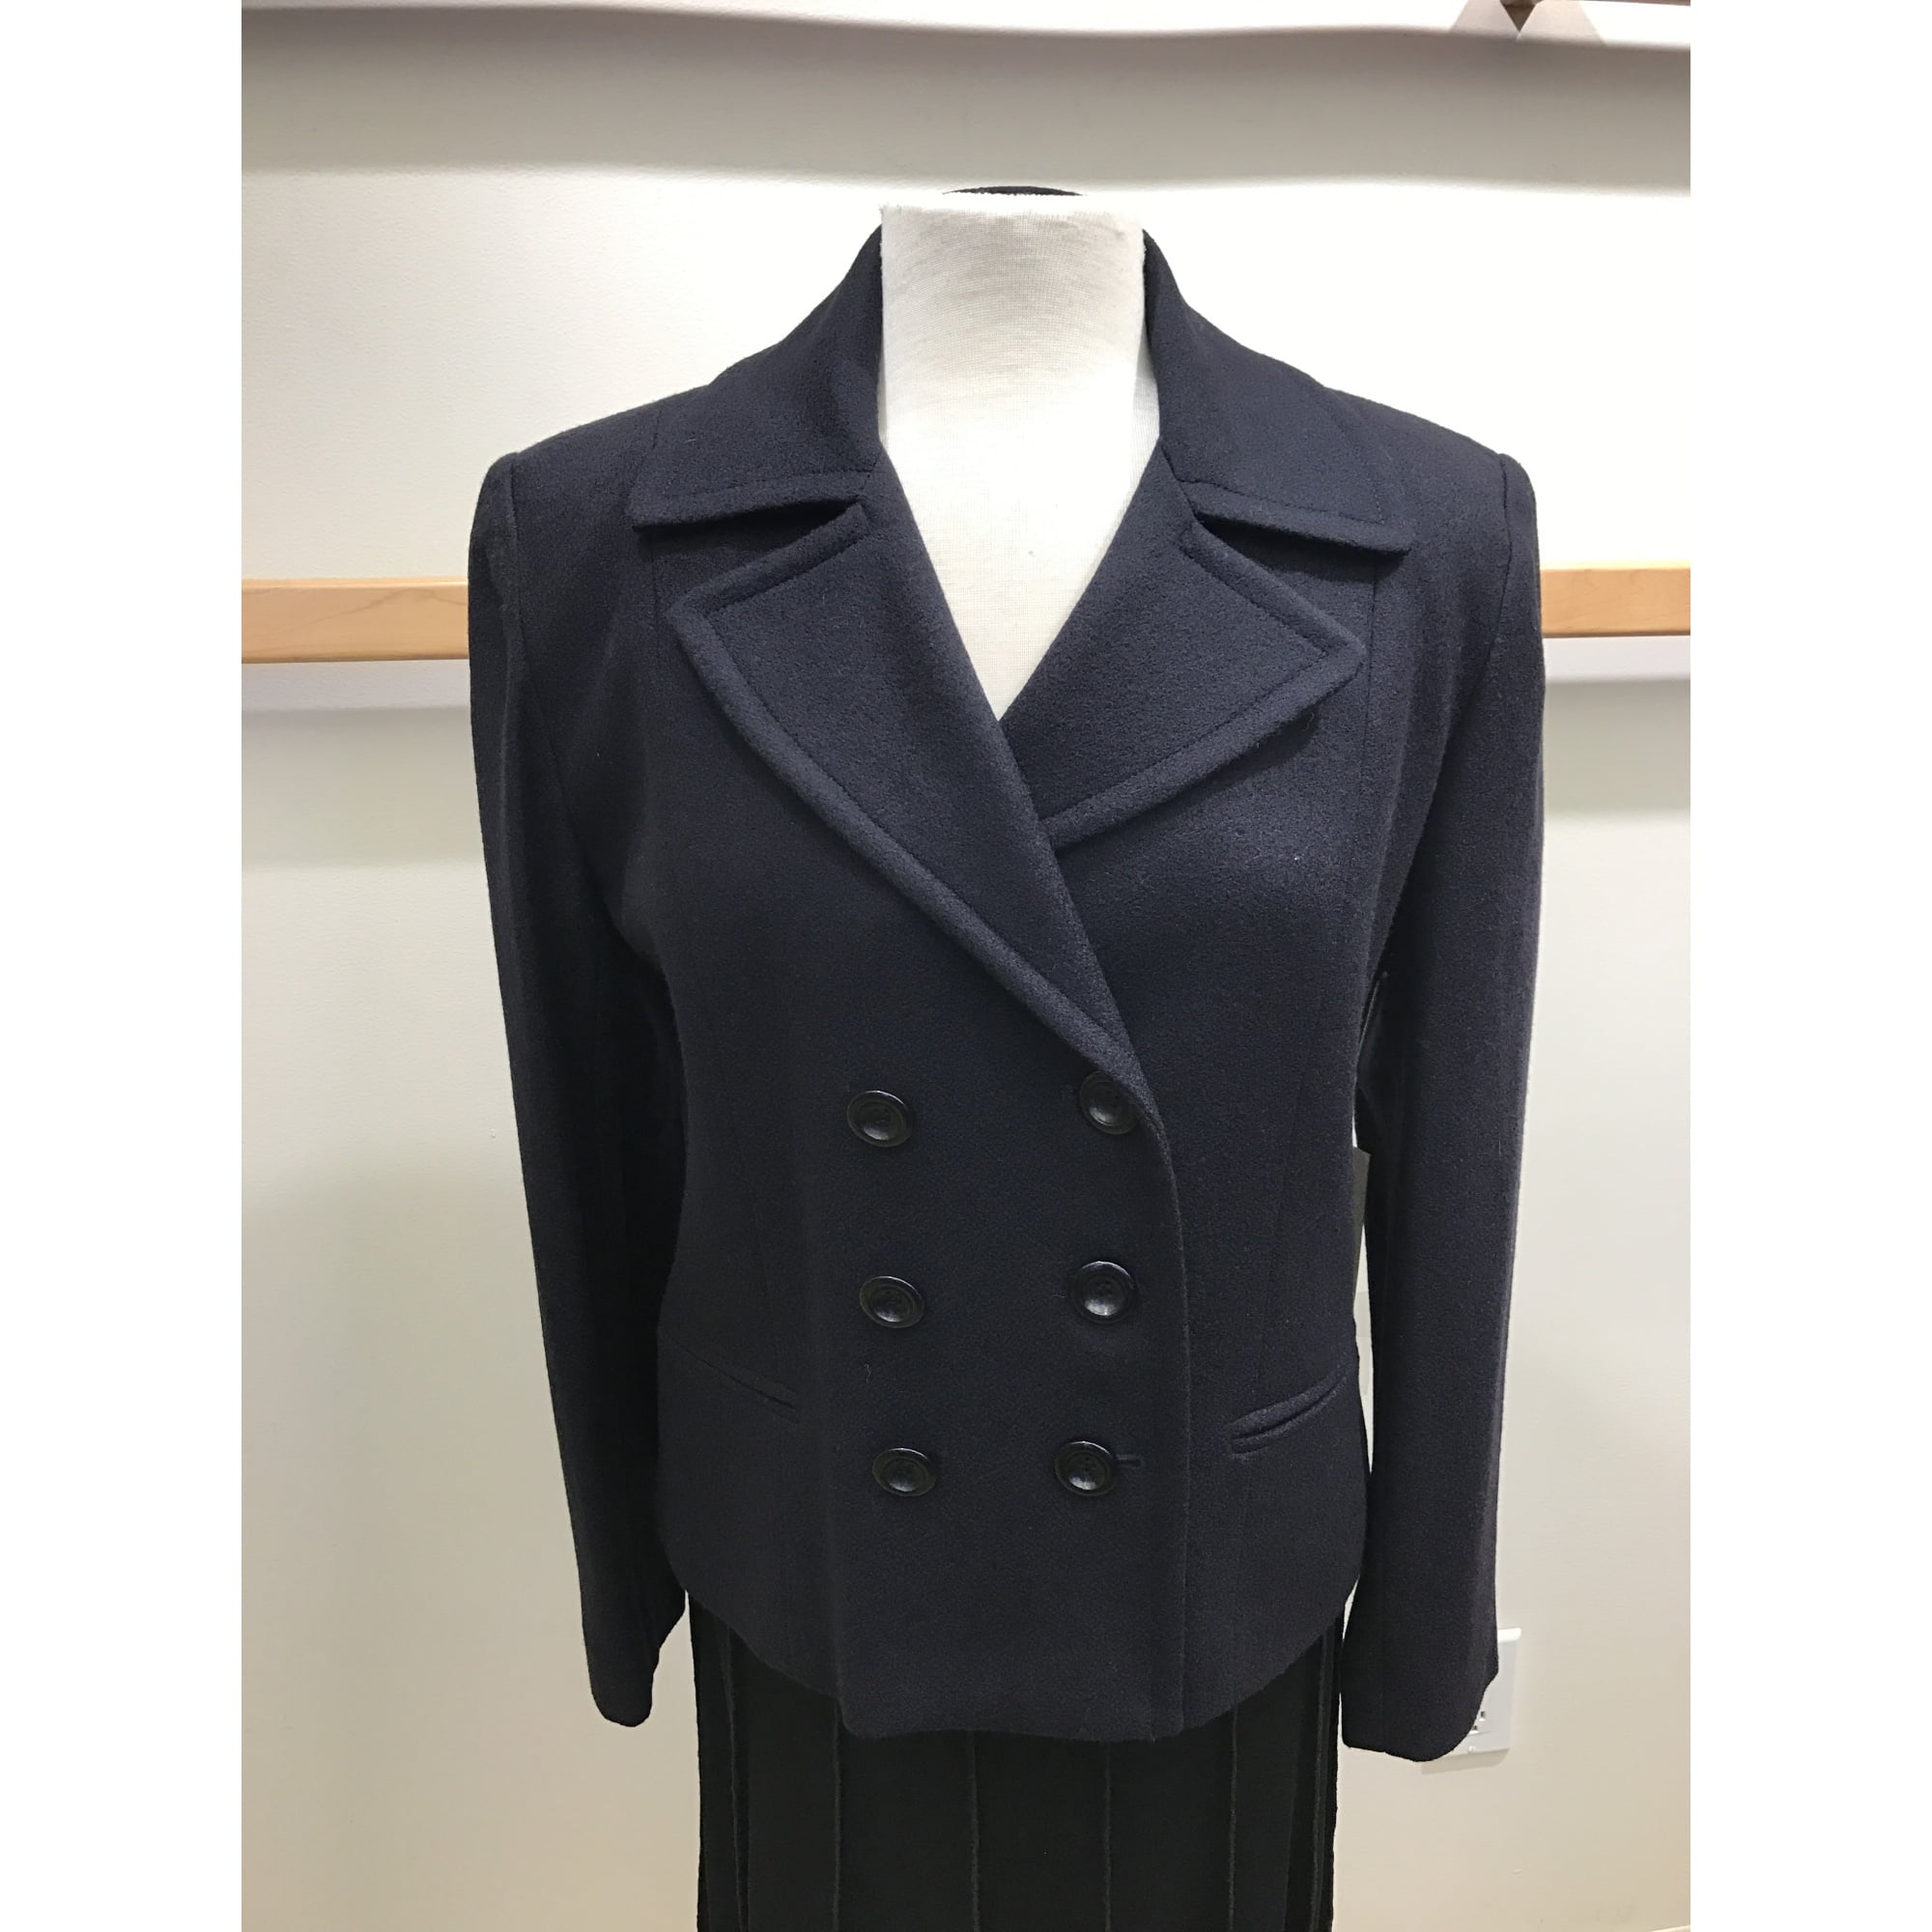 Navy Wool Double Breasted Crop Peacoat Sailor Style Jacket (Style